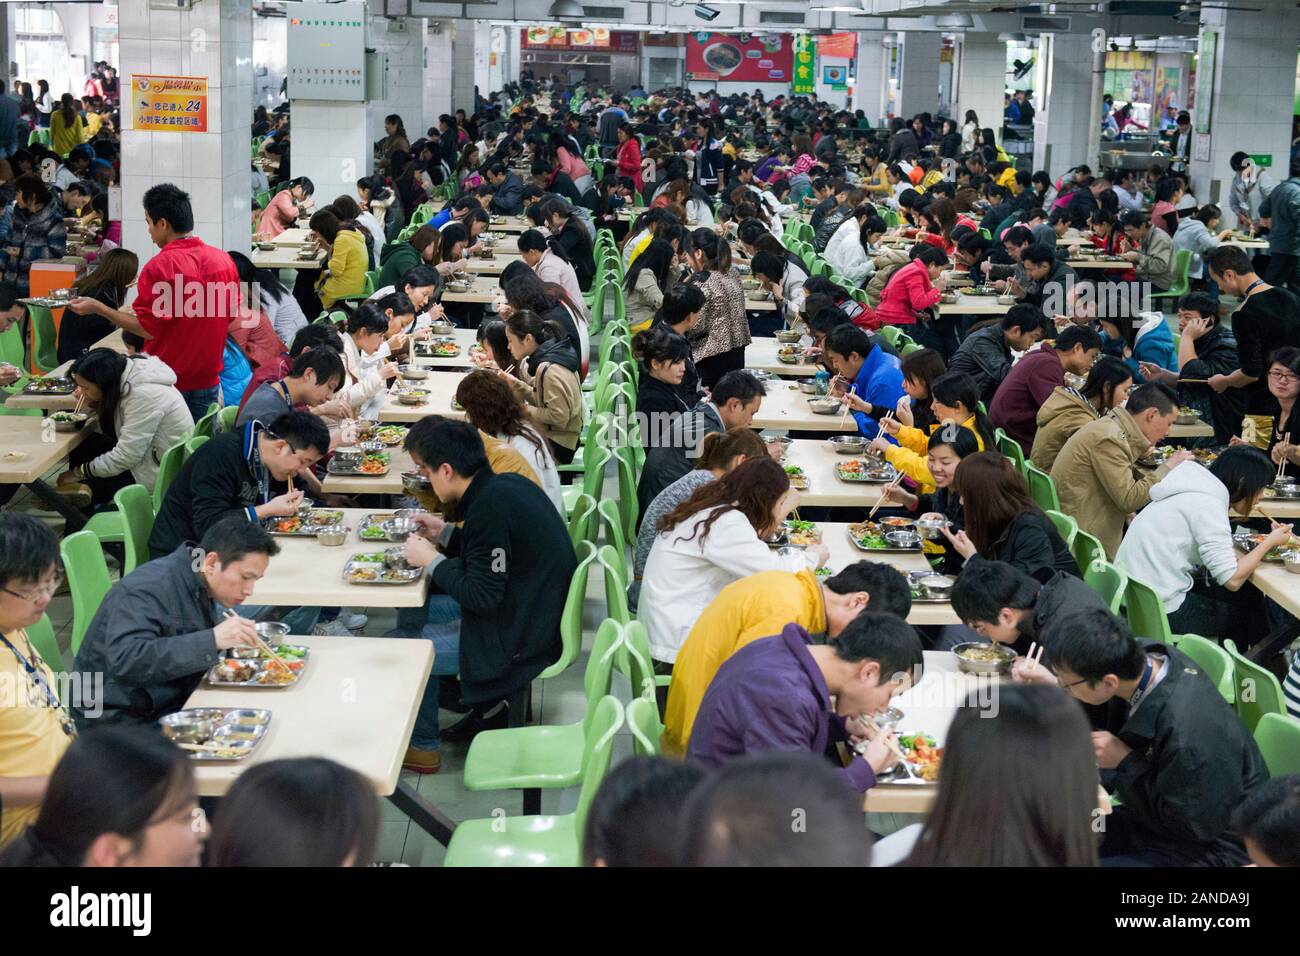 File Chinese Migrant Workers Eat Lunch At The Canteen Which Can Accommodate Over 5000 People Of An Electronics Product Factory In Dongguan City 2ANDA9J 